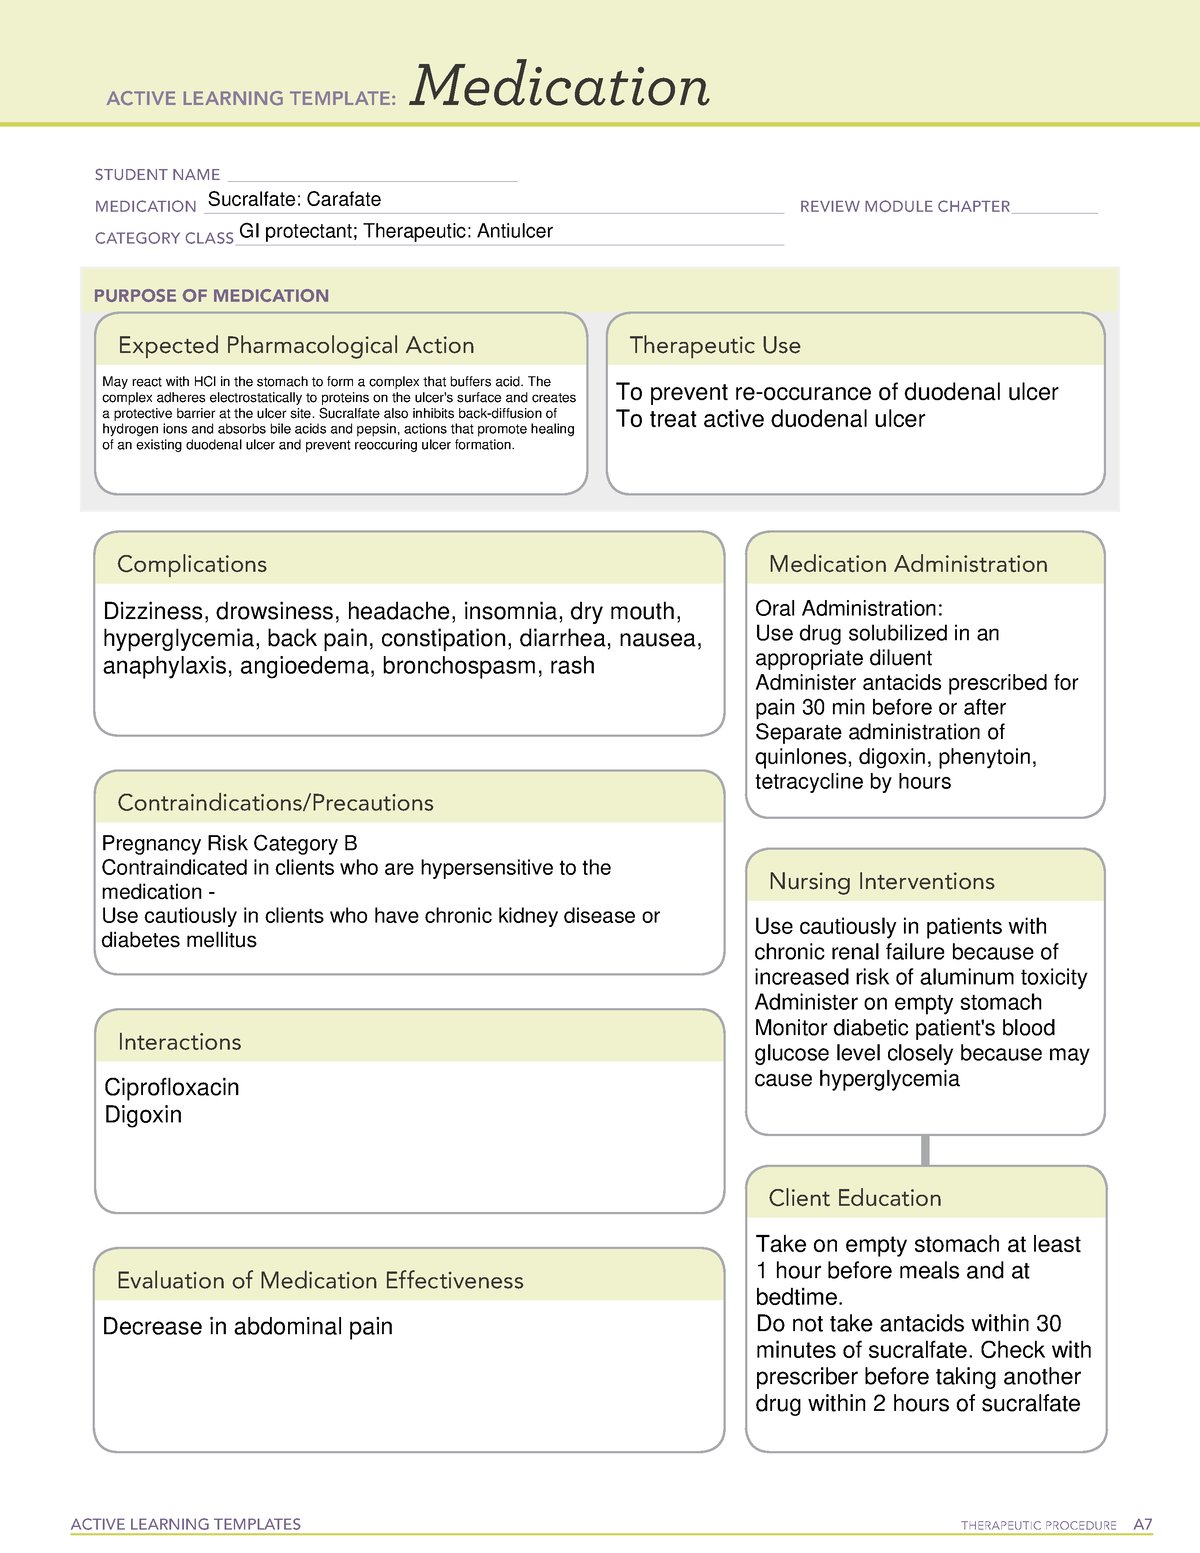 ati-sucralfate-medication-sheet-active-learning-templates-therapeutic